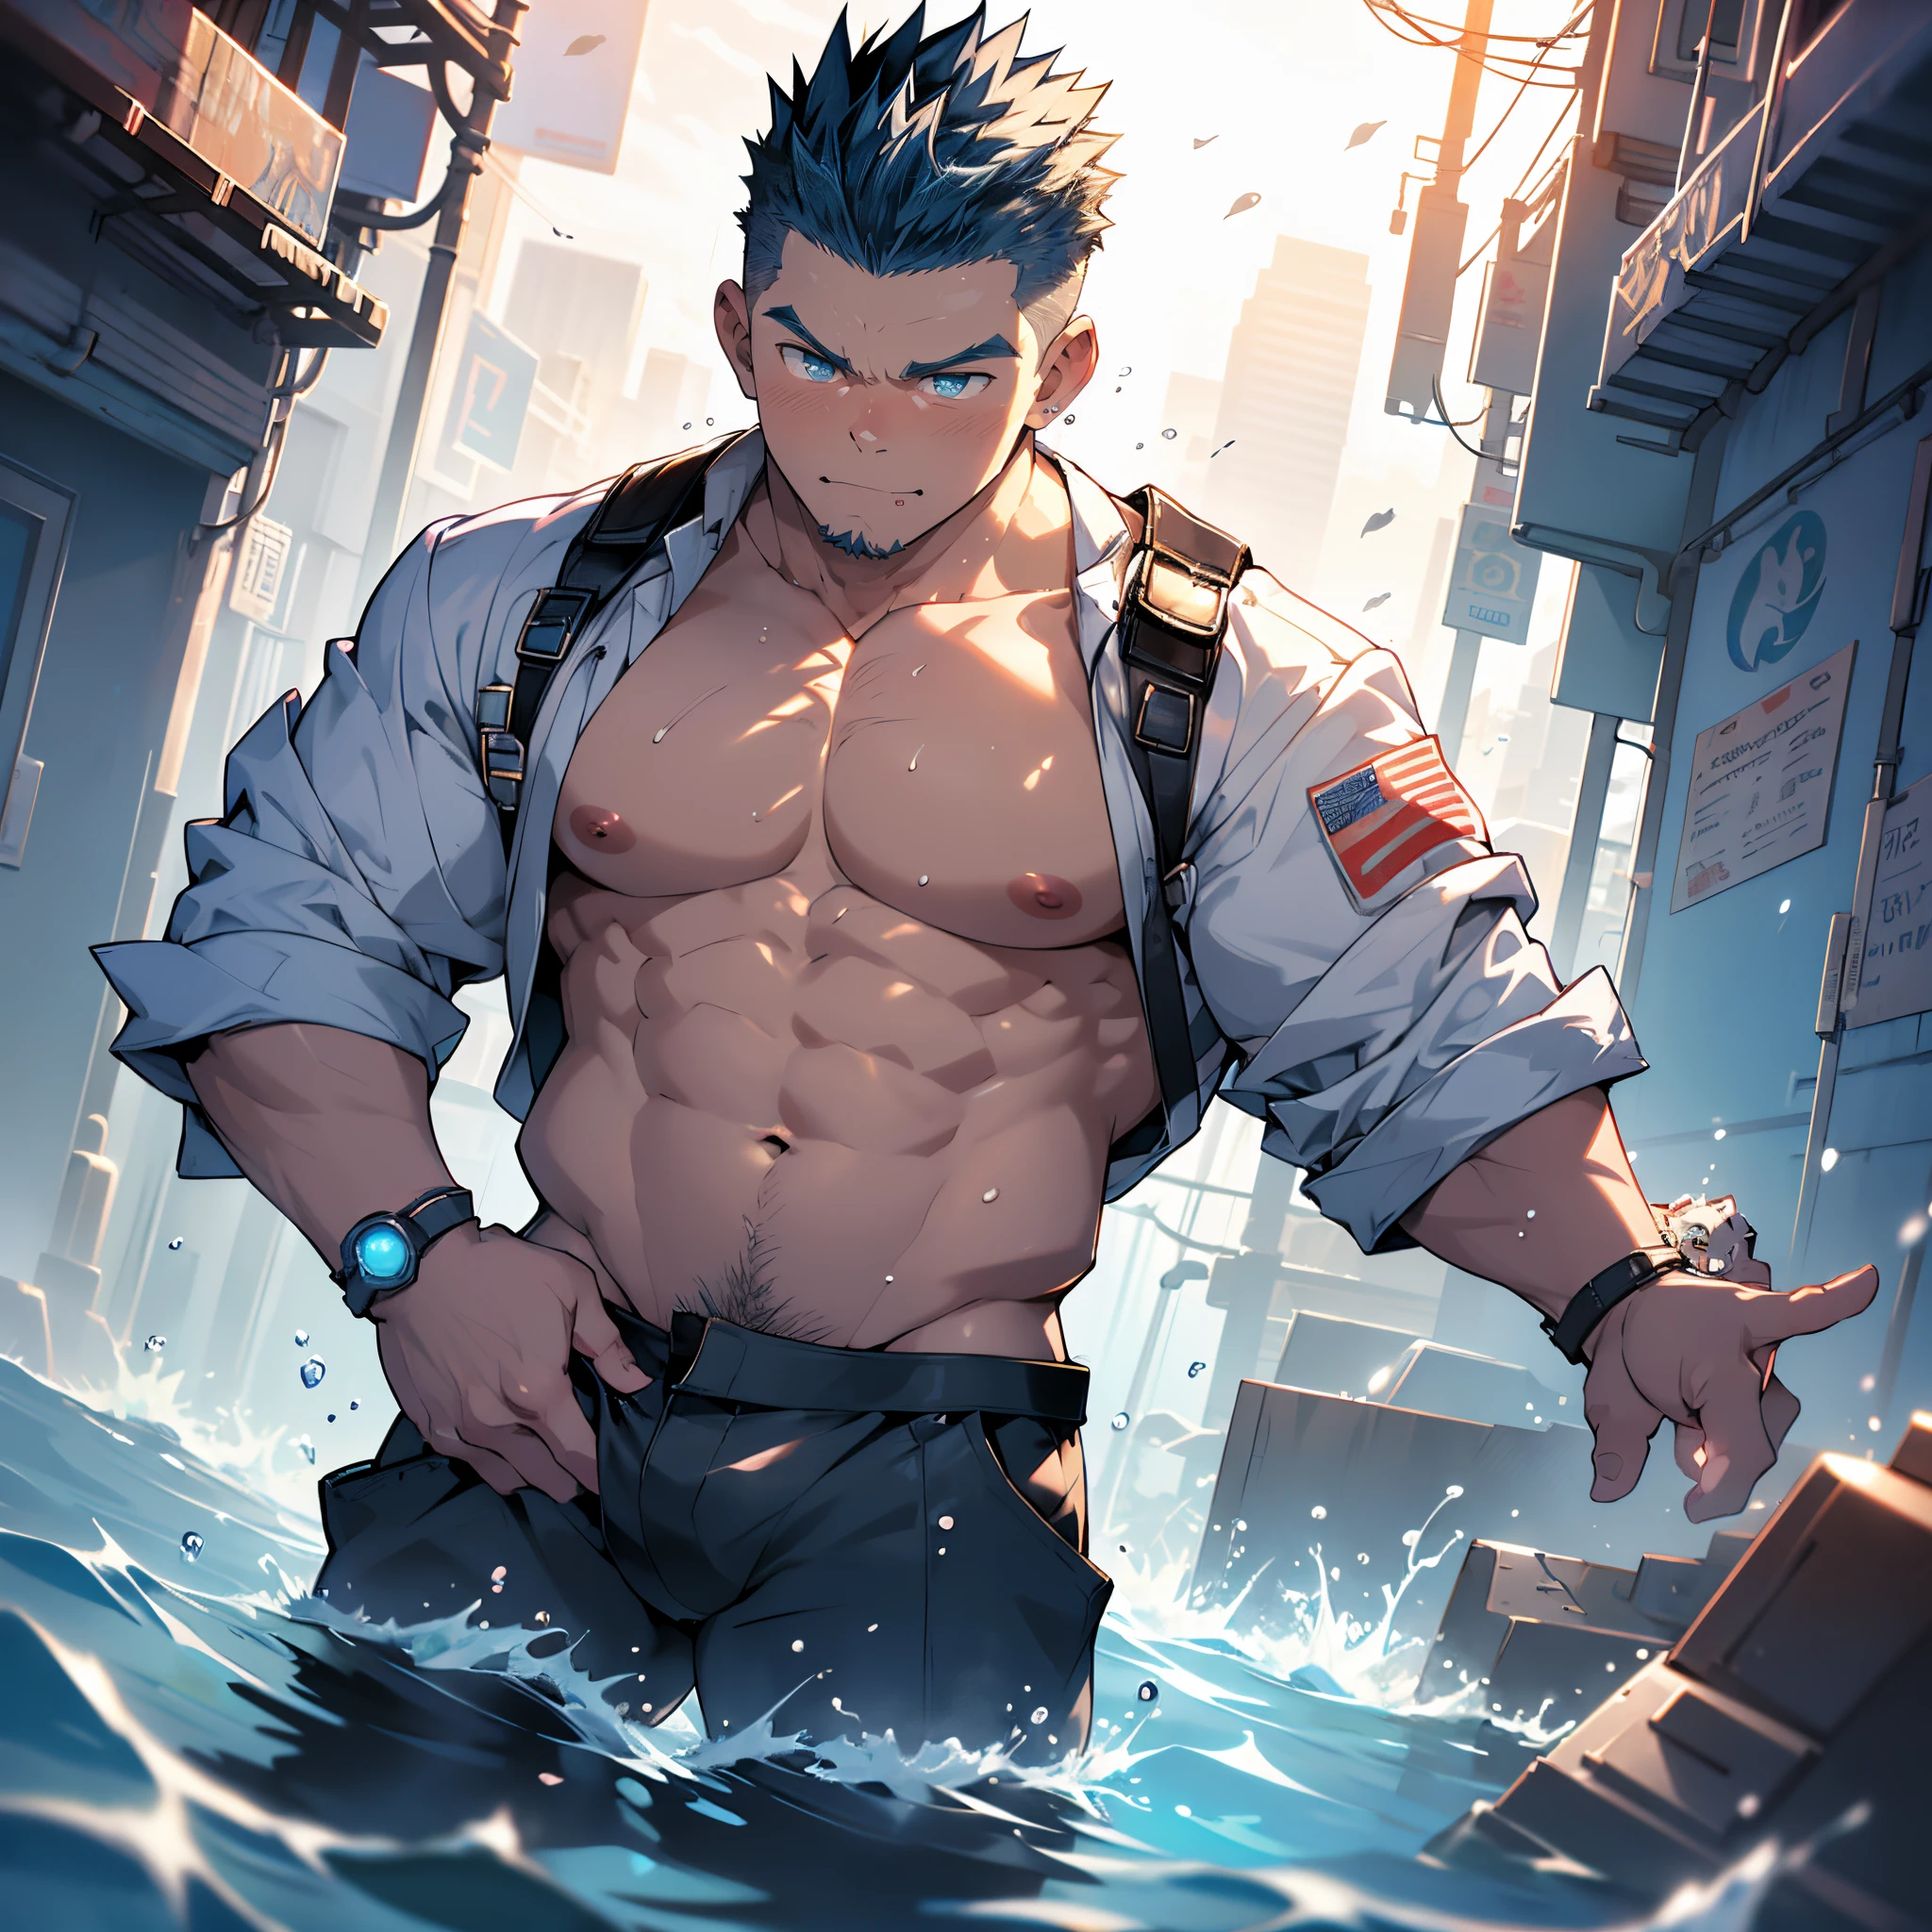 under water skyscraper neon lights effects, undercut, faux hawk, manly kawaii moe babyface, mechanic engineer jacket on shirtless muscular creamy body, meaty thigh, skyrocketing the crotch, magical sci-fi arms weapons, gripping water blade, floating water ball magically, trending on pixiv, kawaii moe anime 8K